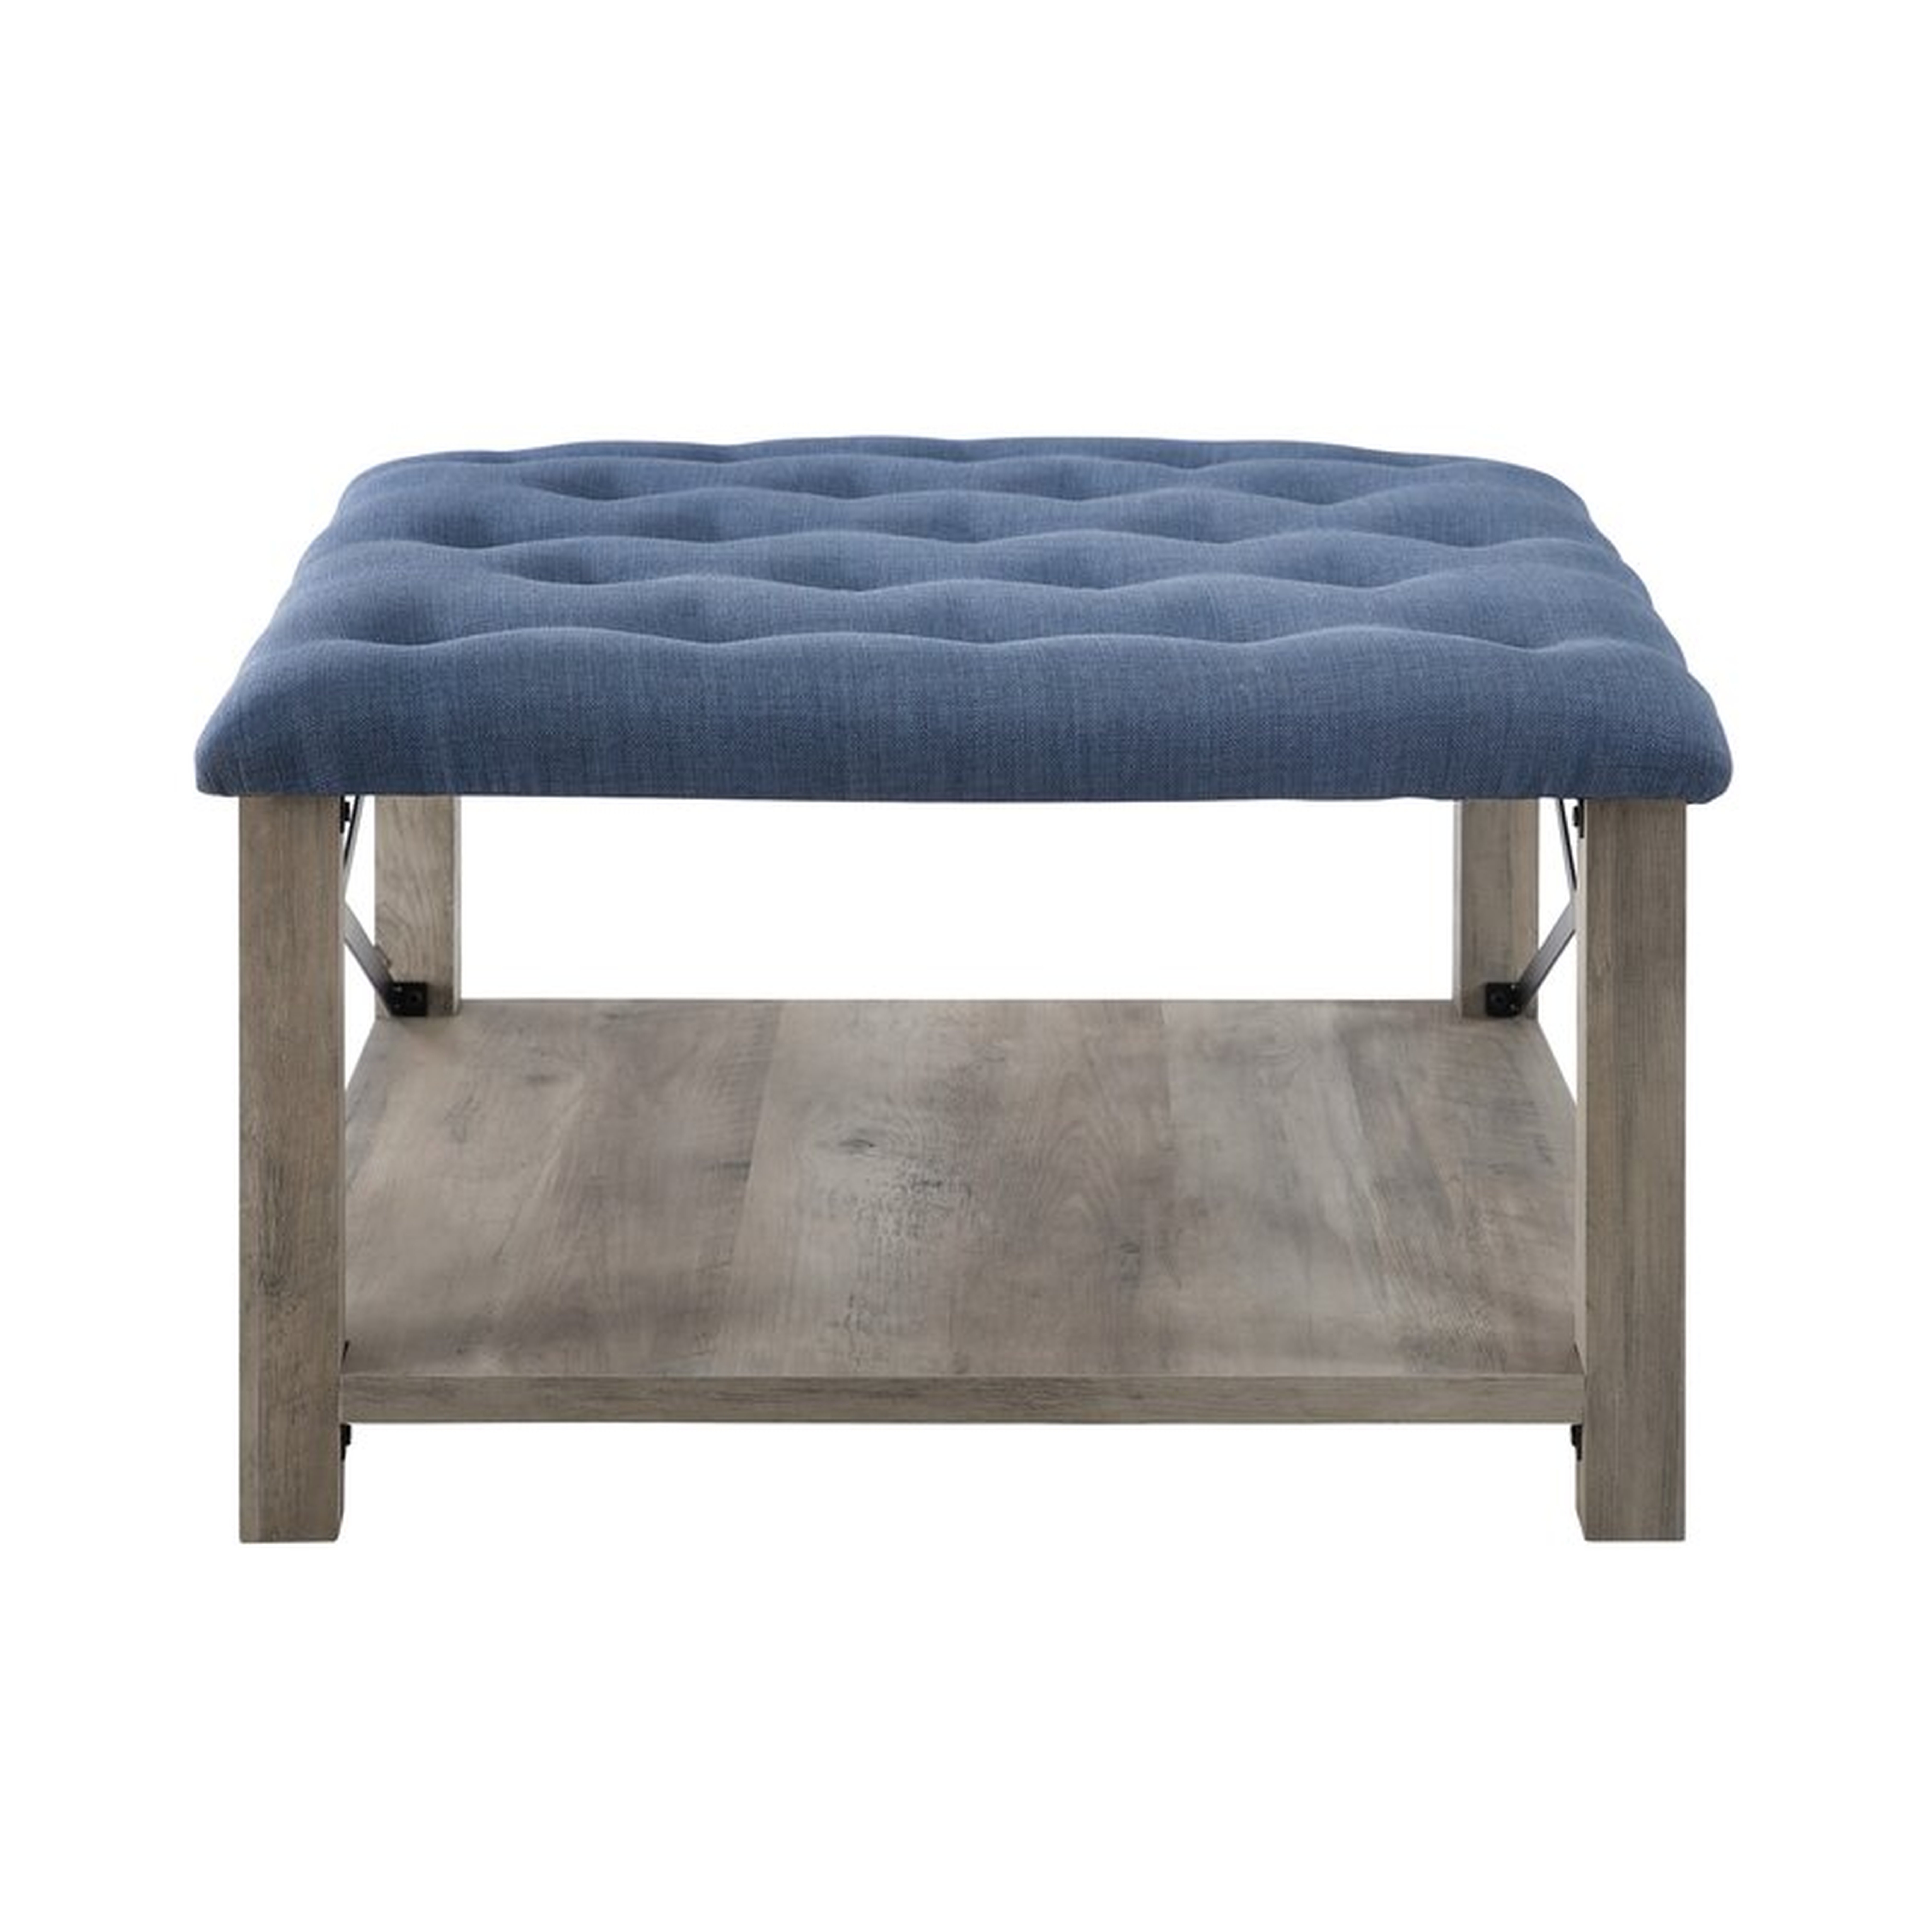 Grube 30" Tufted Square Cocktail with Storage Ottoman - Wayfair